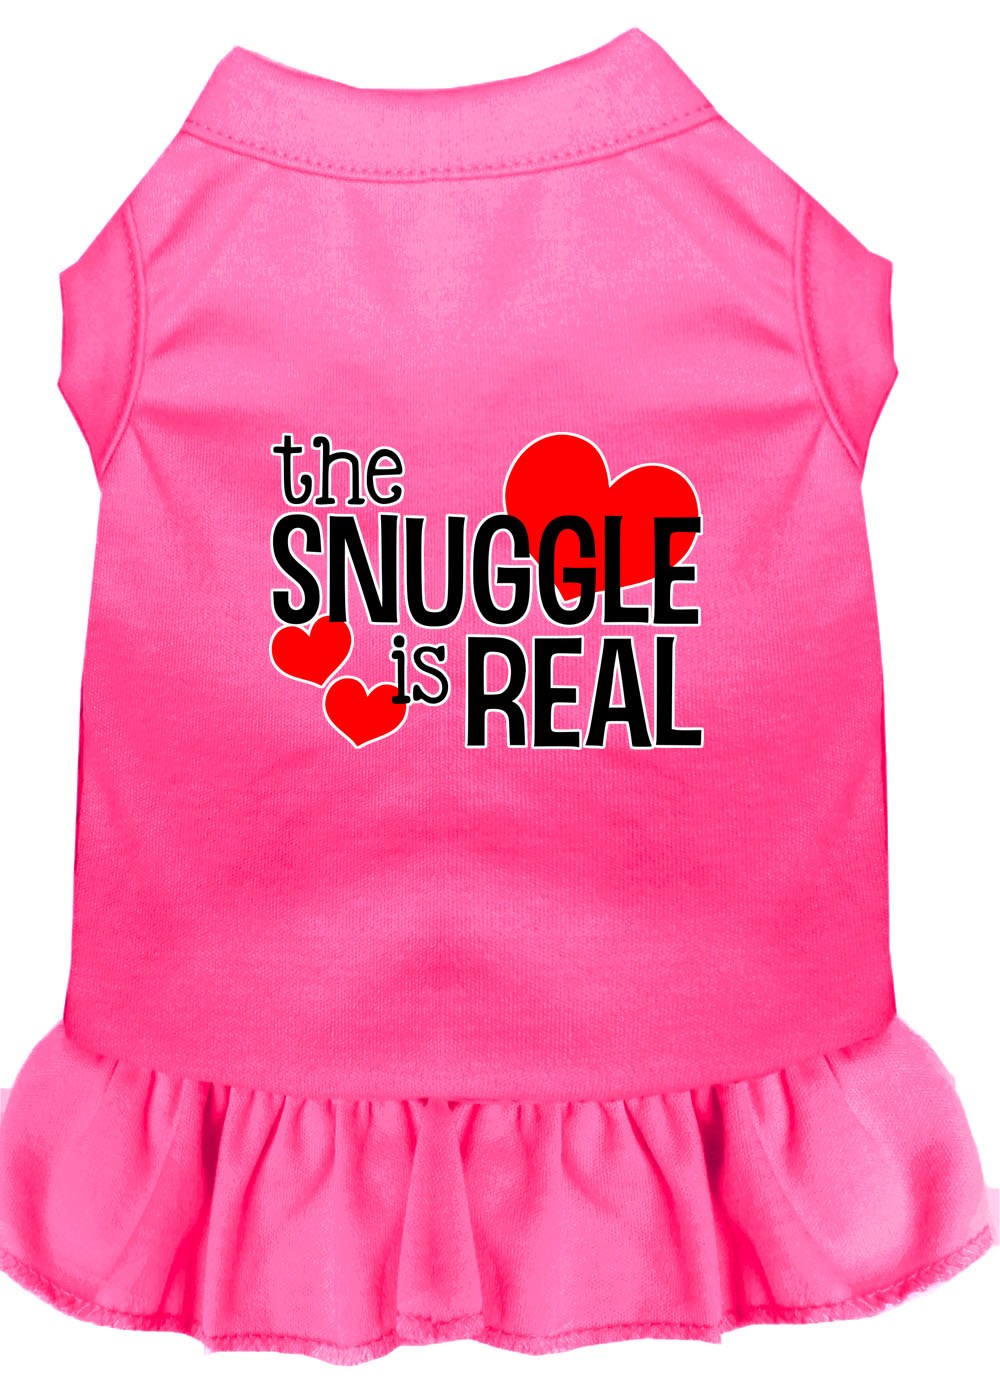 The Snuggle is Real Screen Print Dog Dress Bright Pink Med